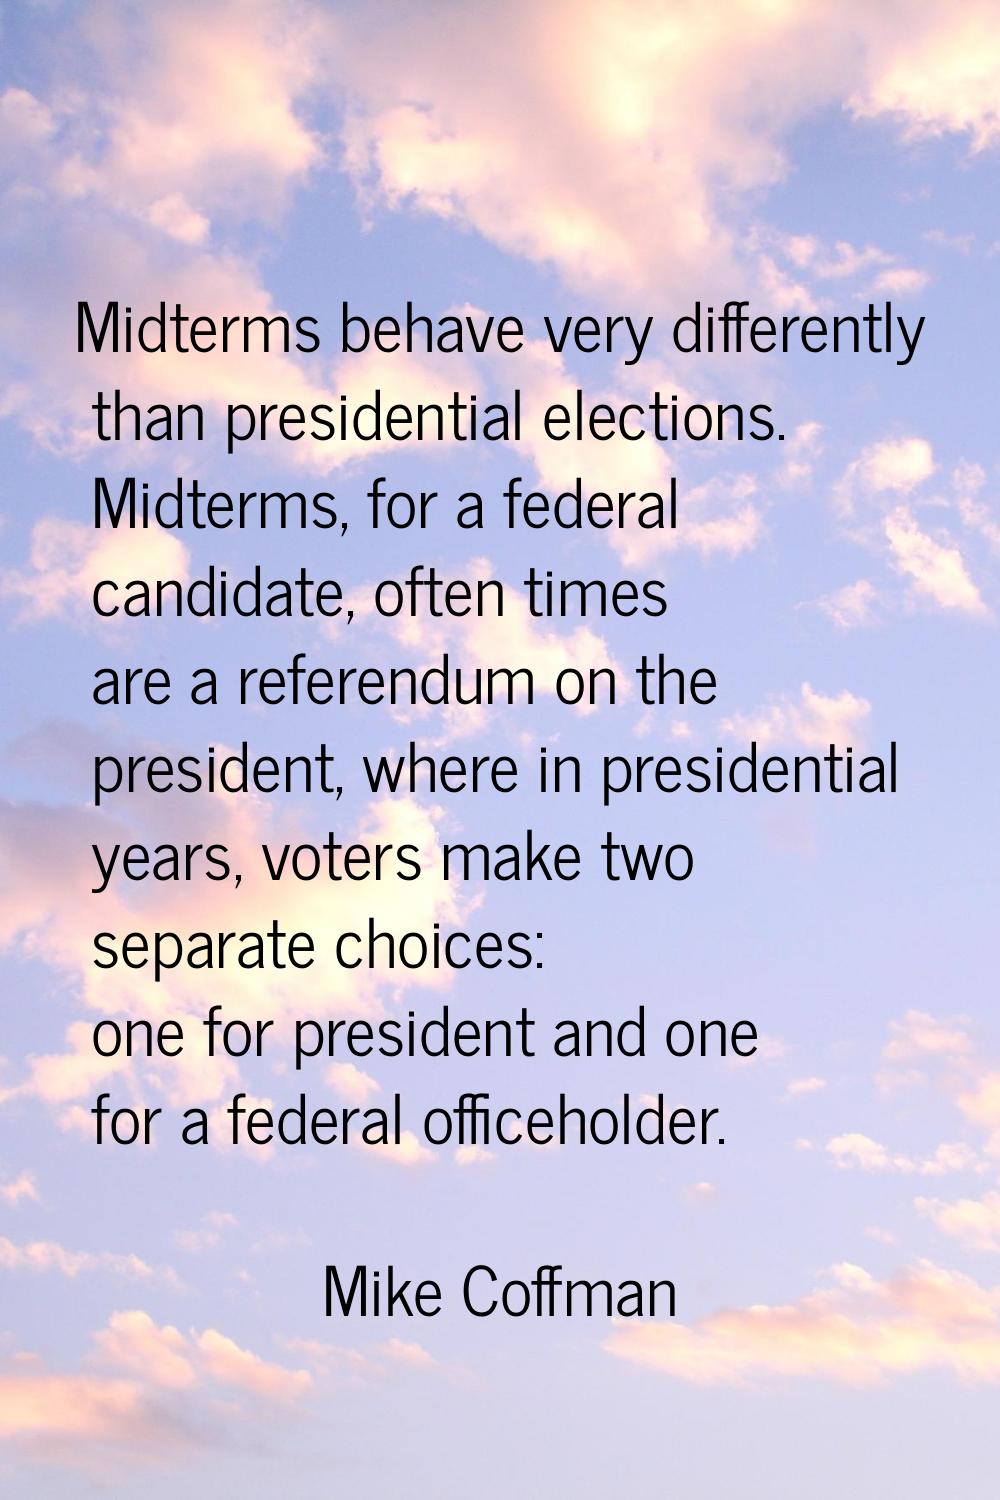 Midterms behave very differently than presidential elections. Midterms, for a federal candidate, of